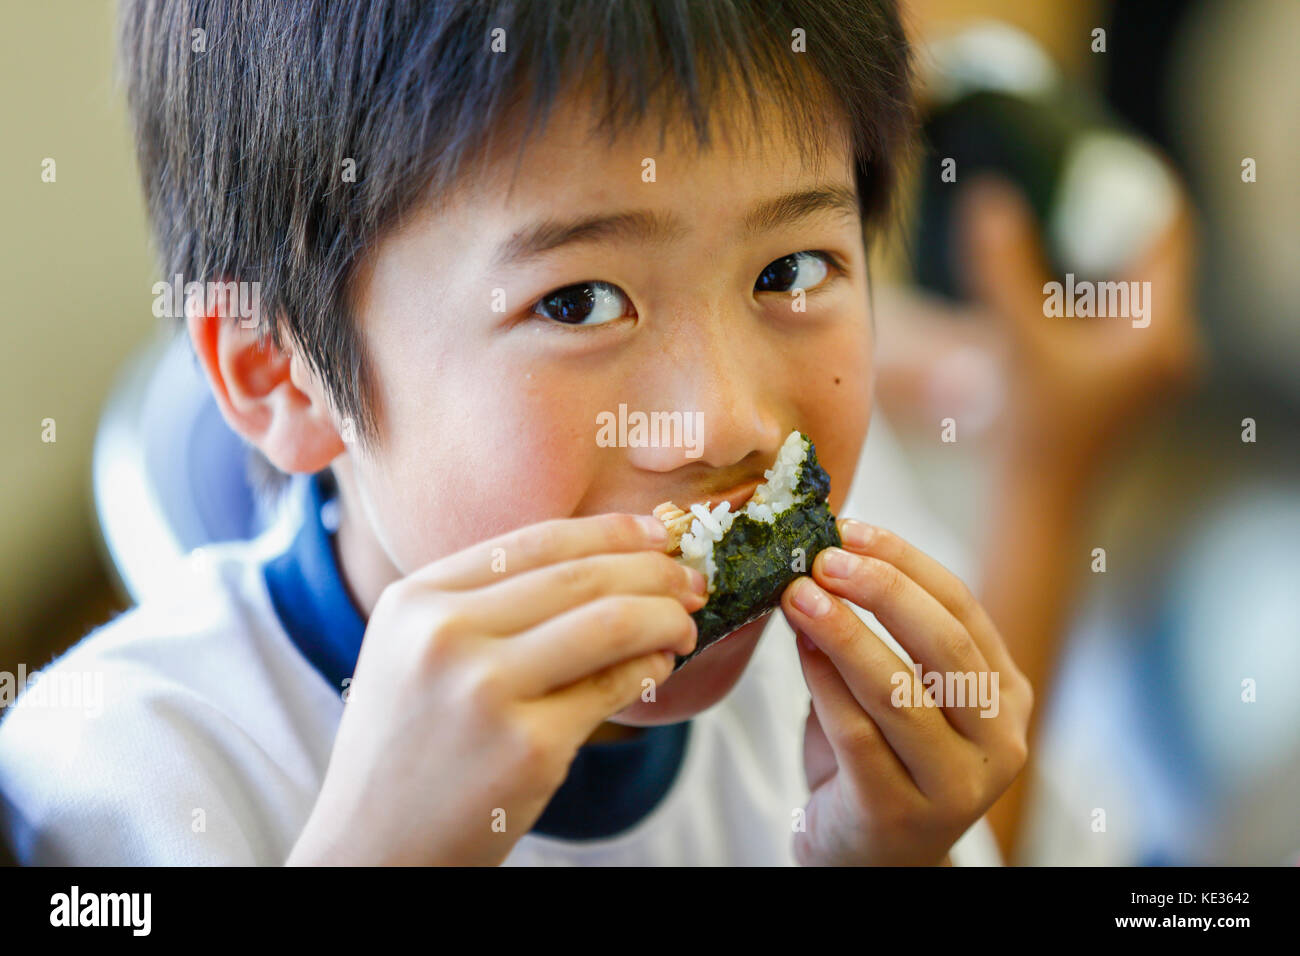 Japanese elementary school kid eating in the classroom Stock Photo